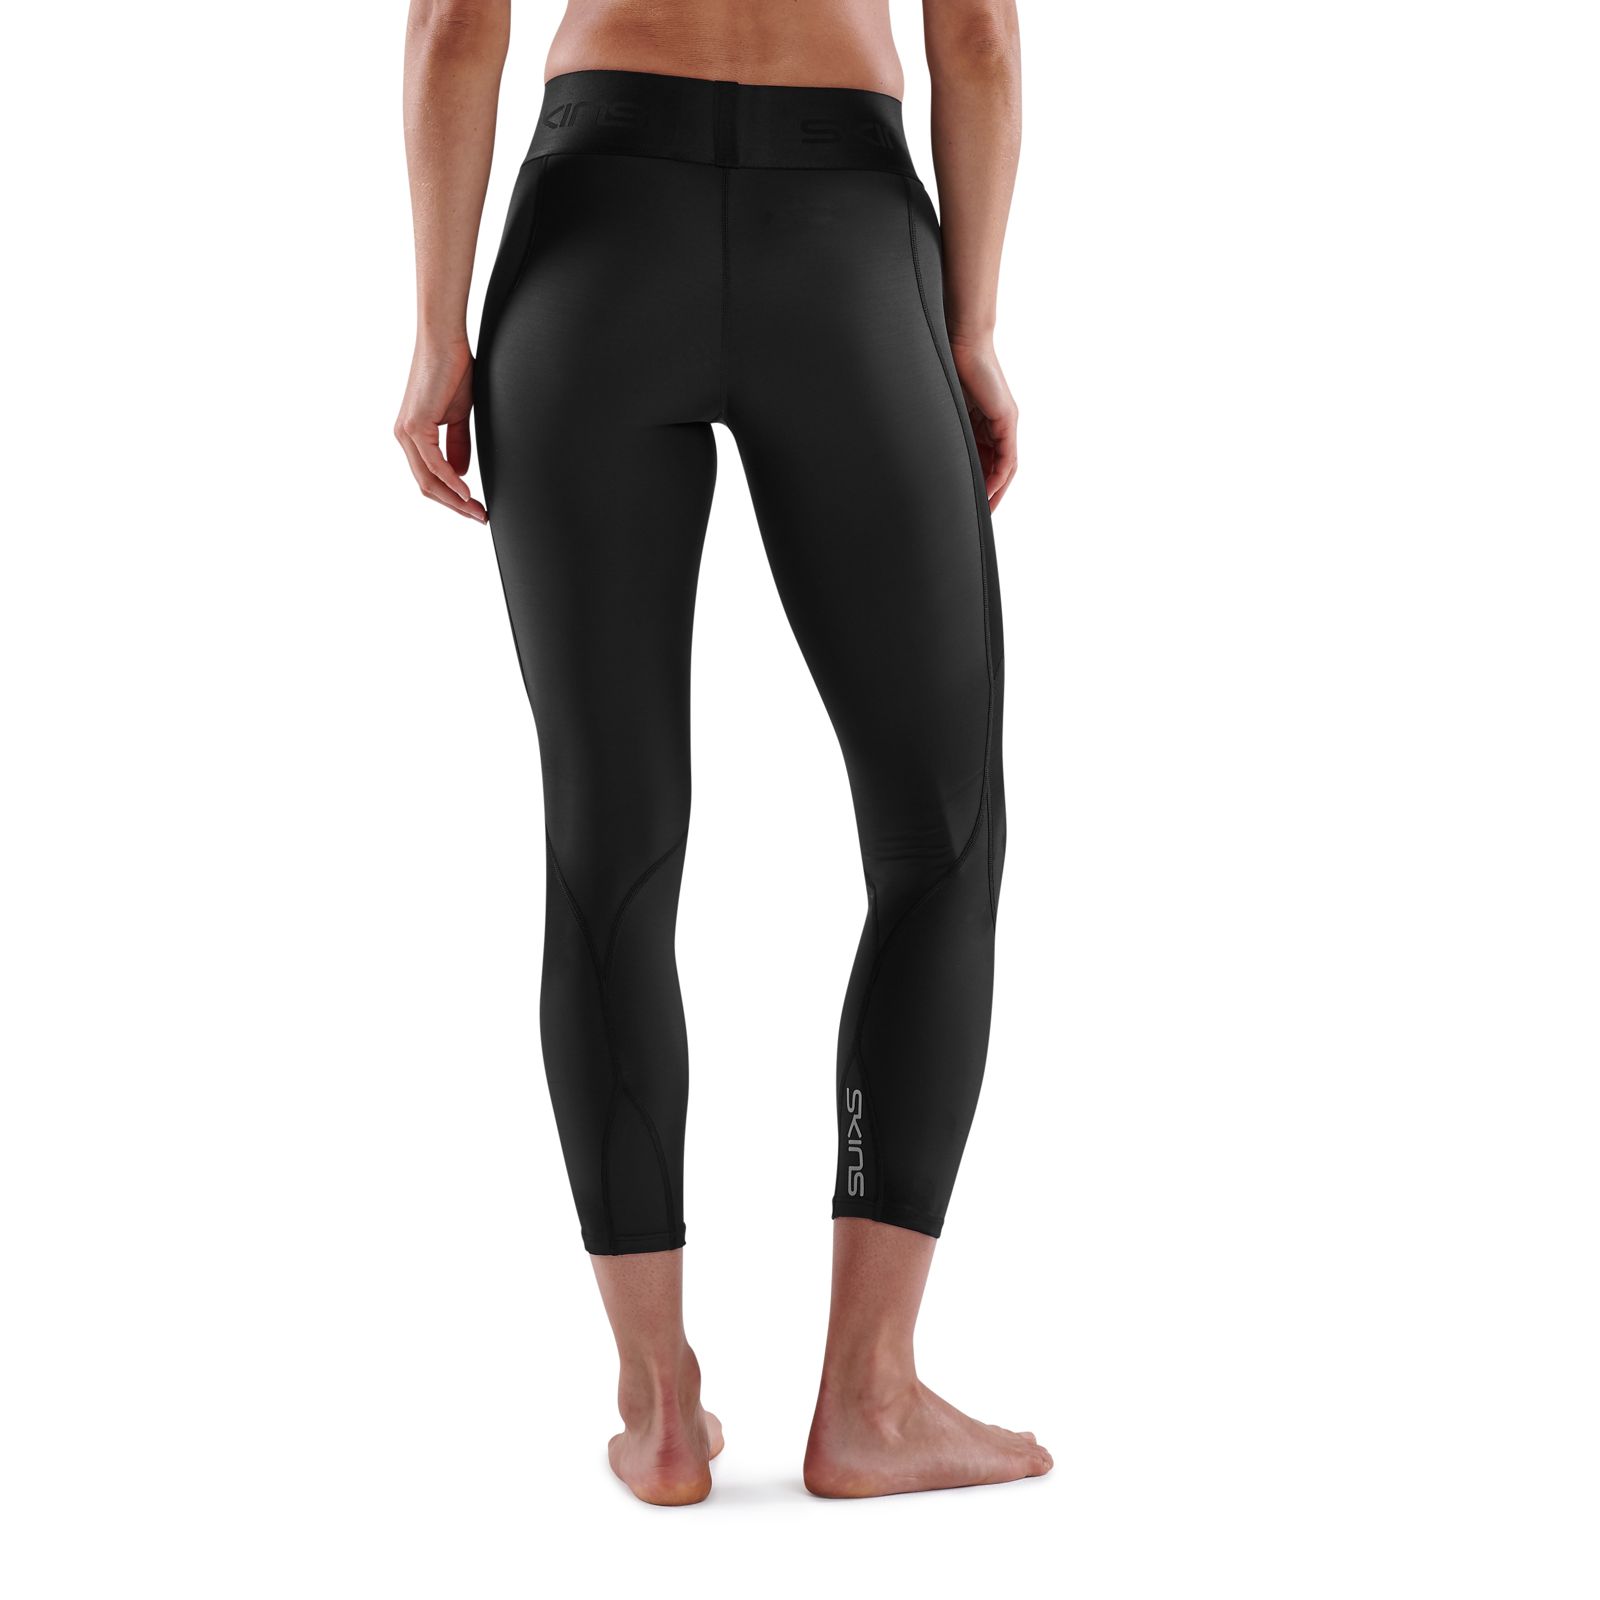 SLIM Signature 7/8 Compression Leggings with Silver Anti-bacterial Finish -  Proskins Men and Womens Baselayers and Sportswear